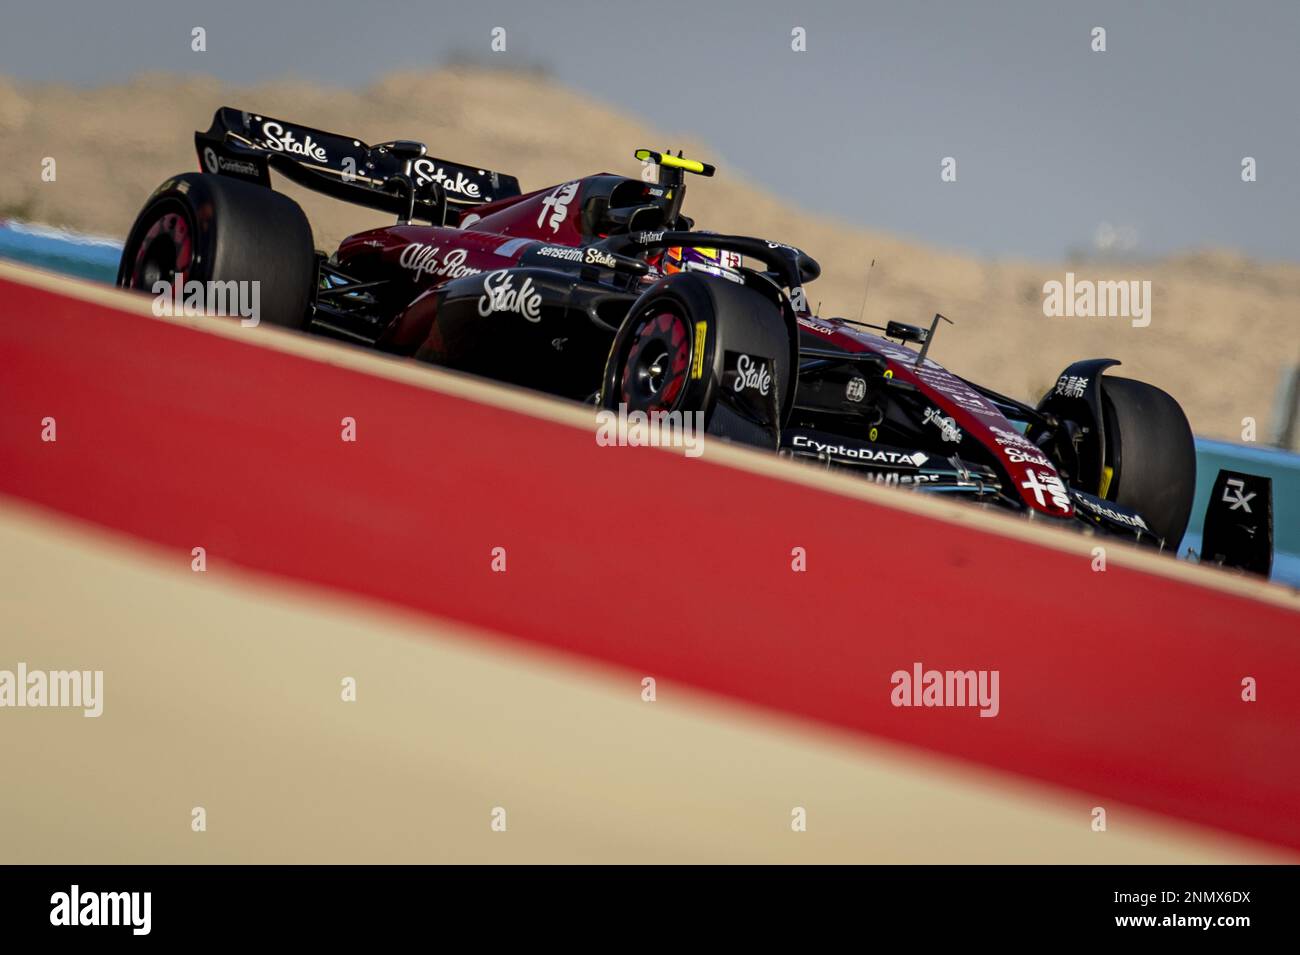 BAHRAIN - Zhou Guanyu (Alfa Romeo) during the second day of testing at the Bahrain International Circuit ahead of the start of the Formula 1 season. ANP SEM VAN DER WAL netherlands out - belgium out Stock Photo